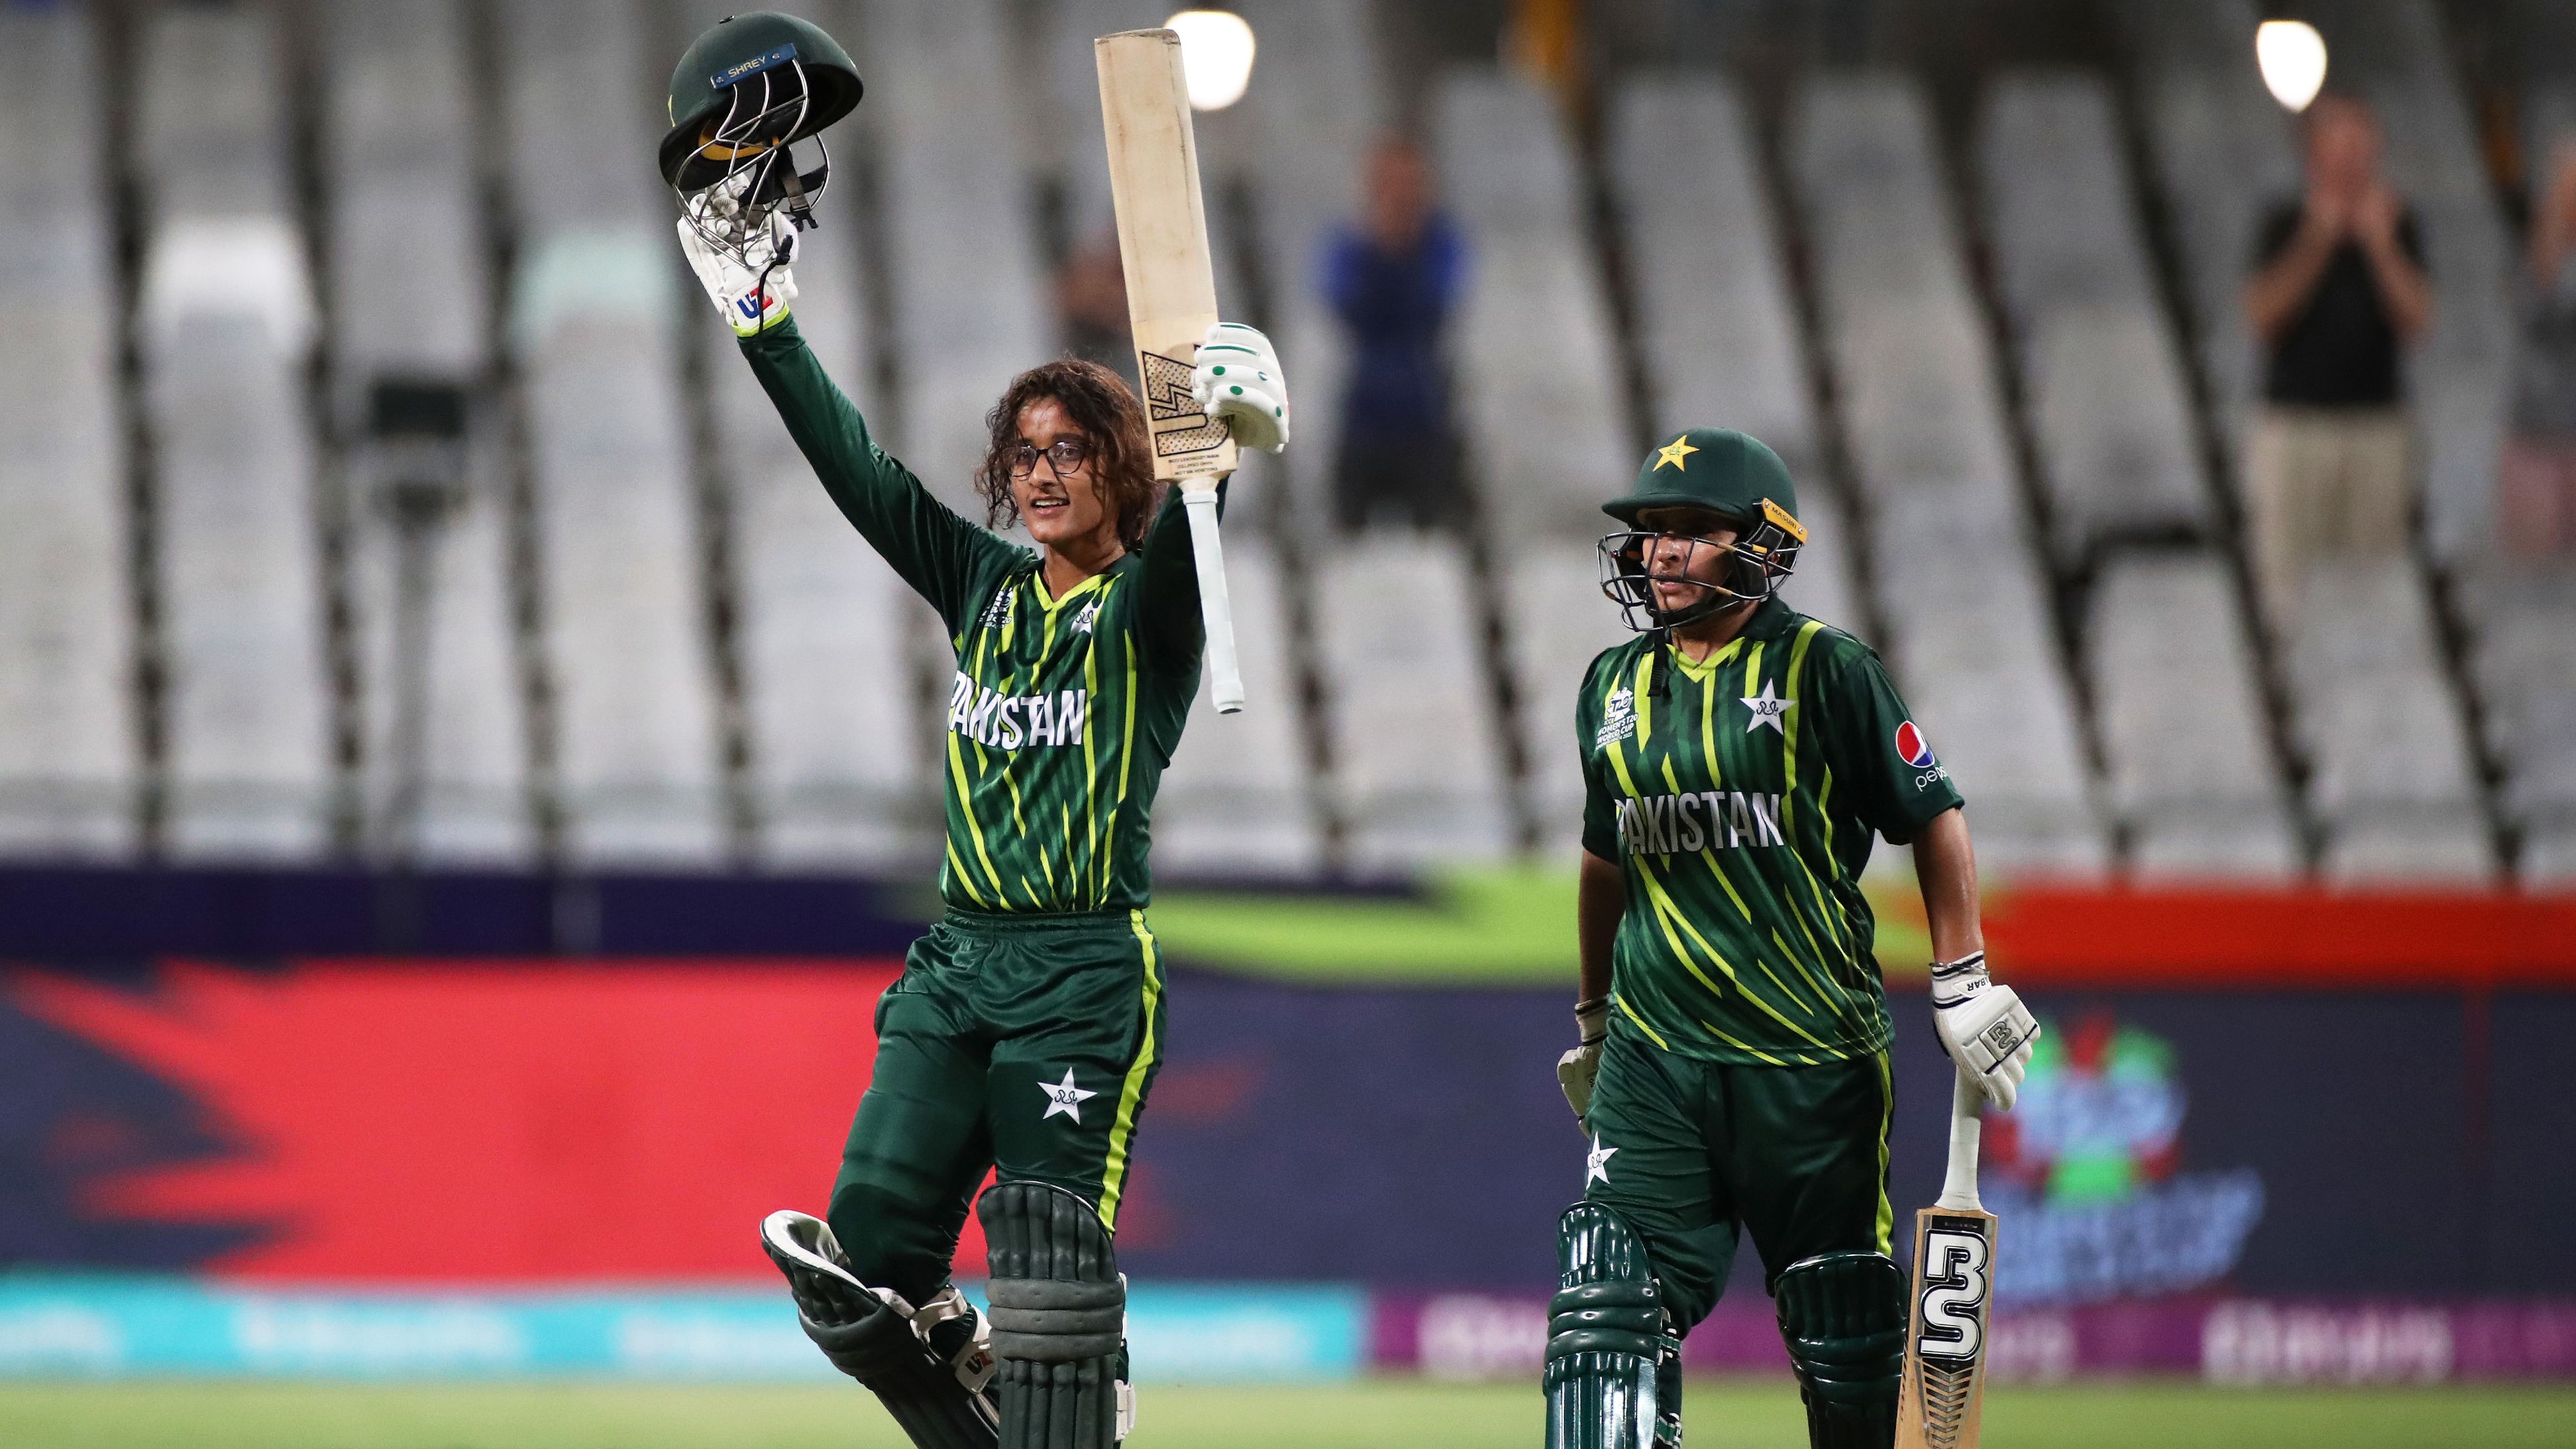 Star becomes first Pakistan woman to score a T20I century in win over Ireland